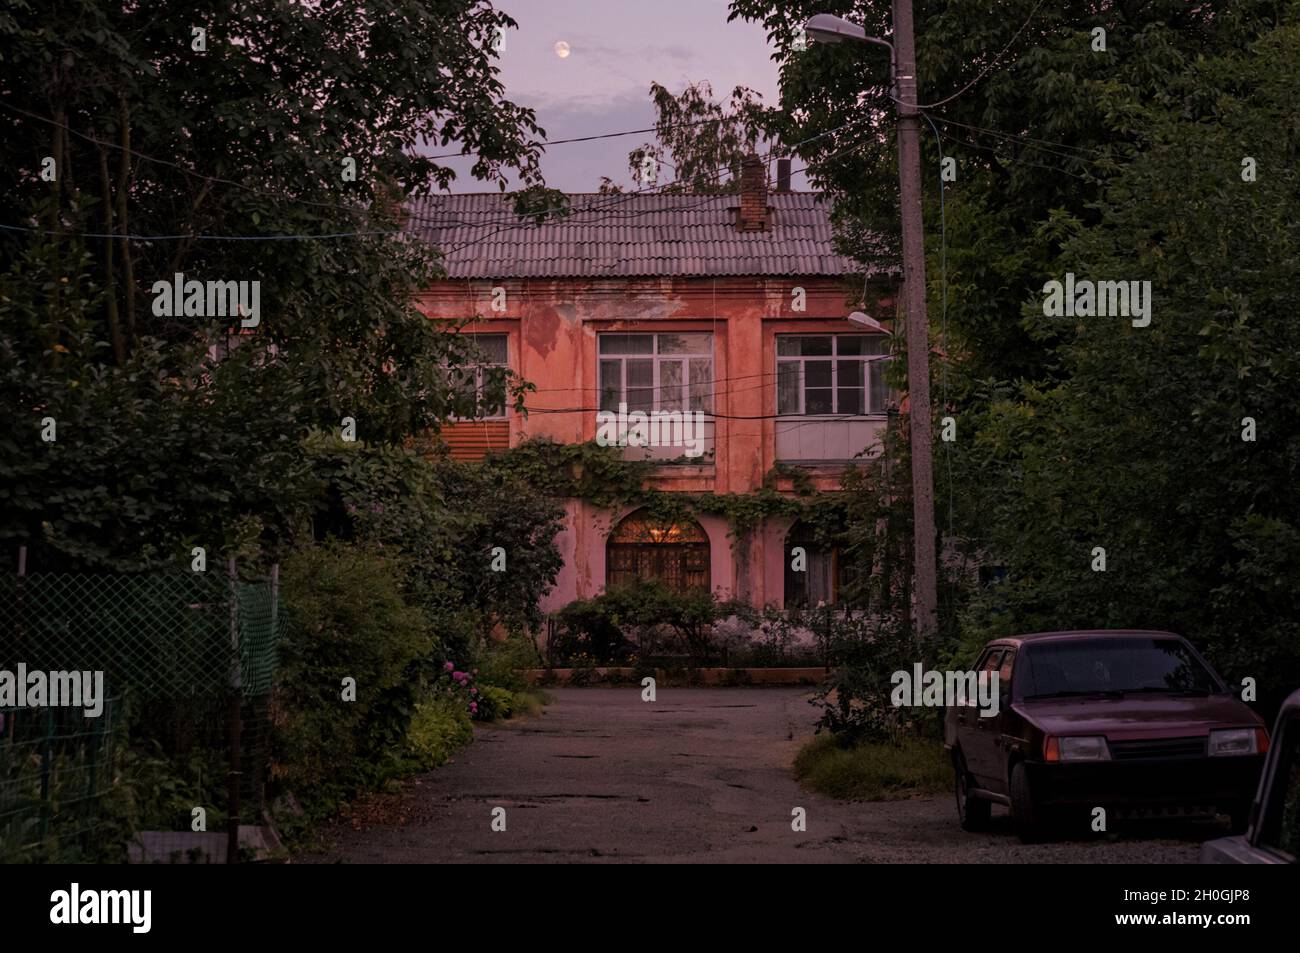 Night outdoor photo of small town old two storey house yard drowned in greenery with an old car parked on the road side in dusk with moon above clouds Stock Photo